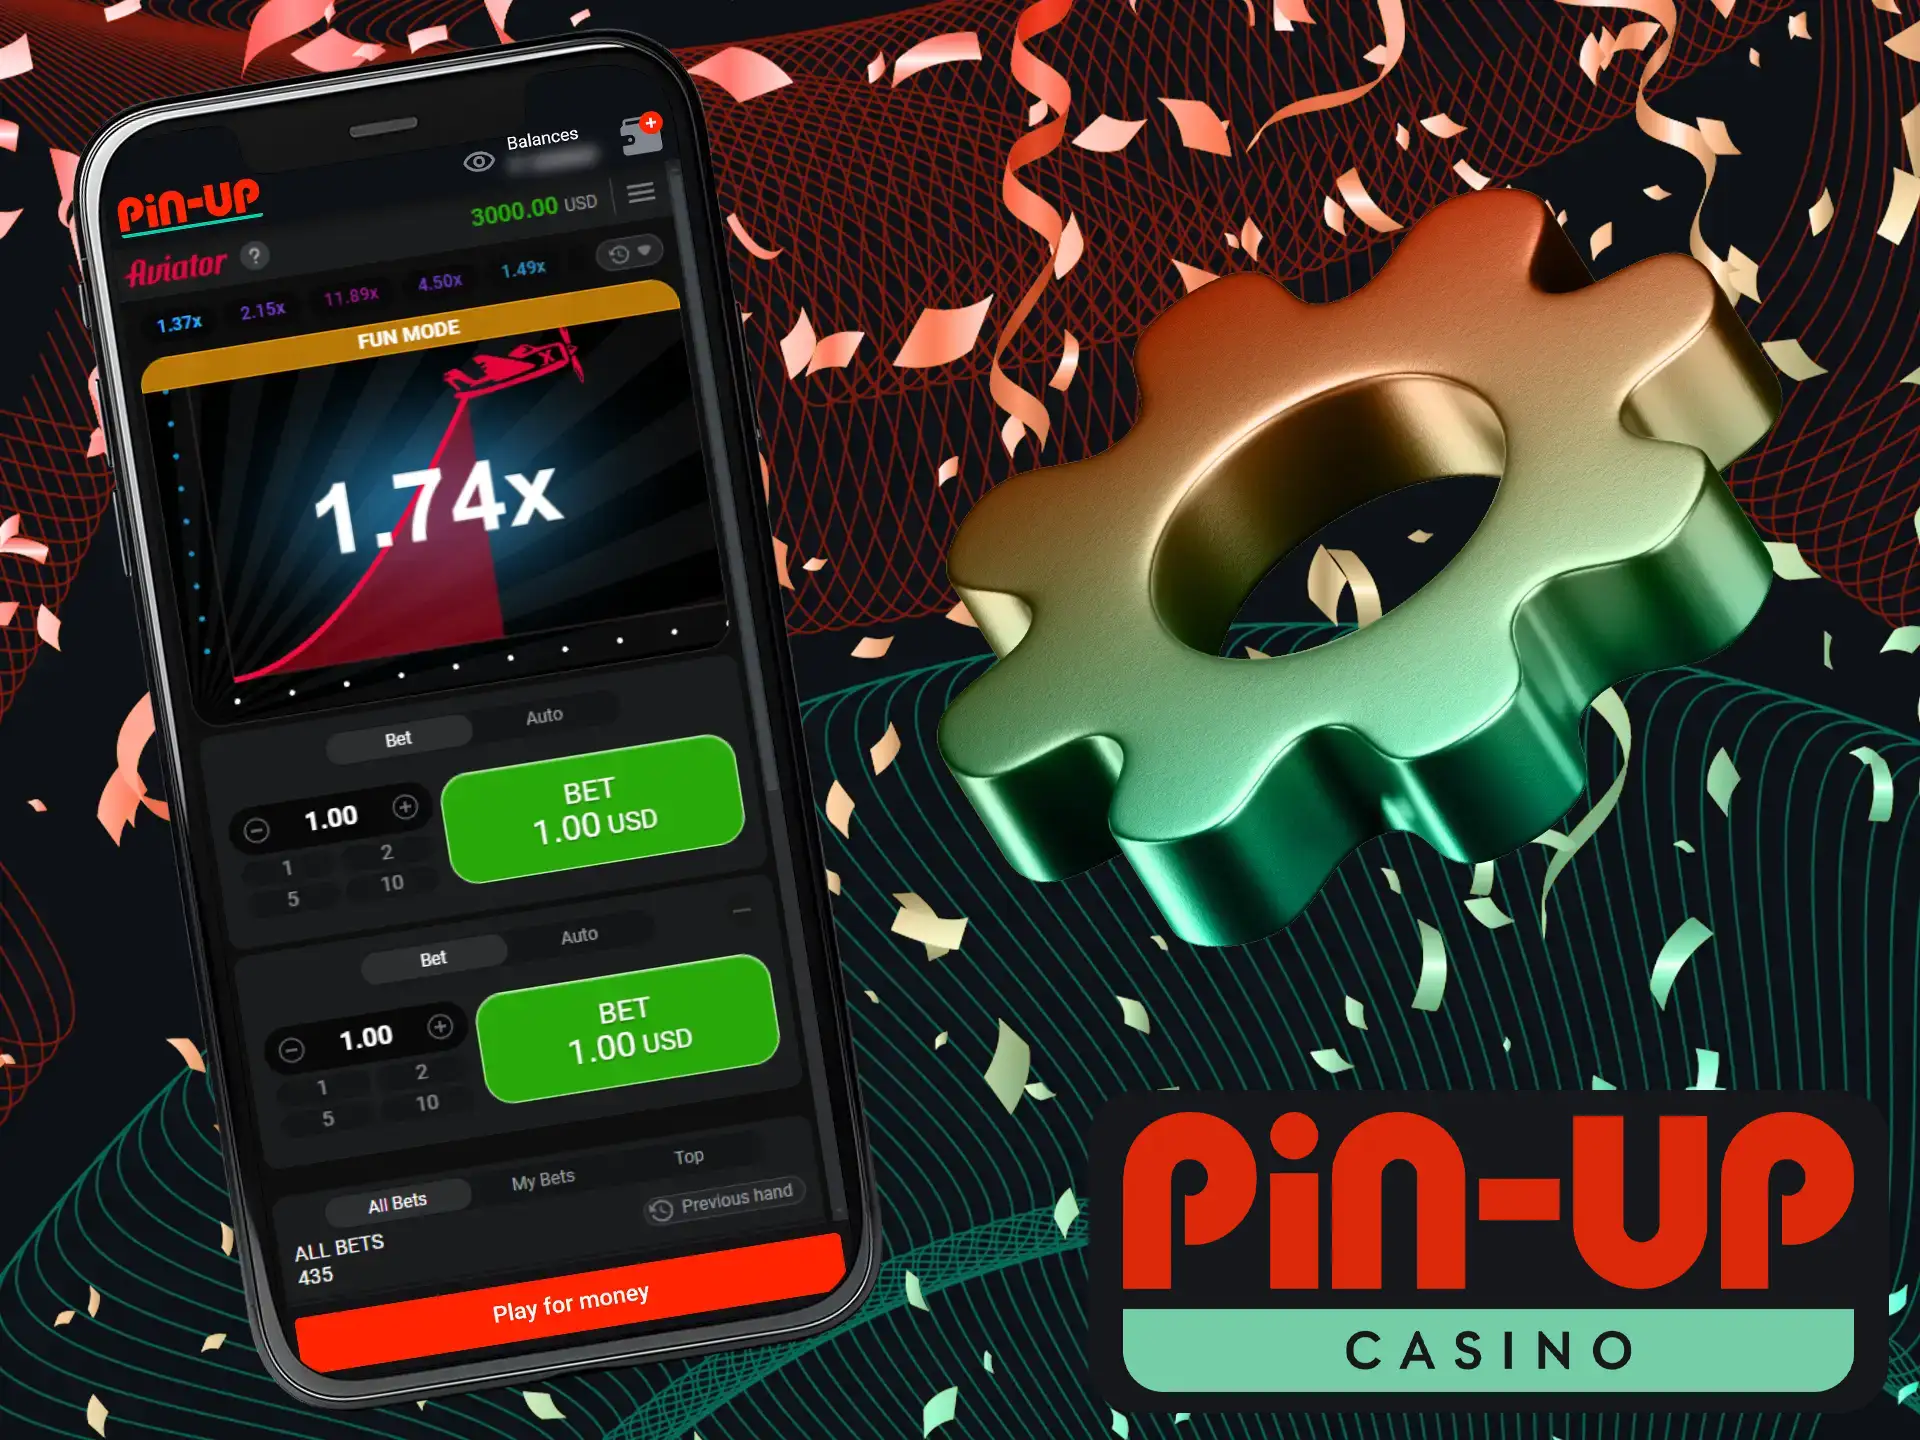 Aviator at Pin-Up Casino is mobile friendly, so you can join the action from your smartphone.